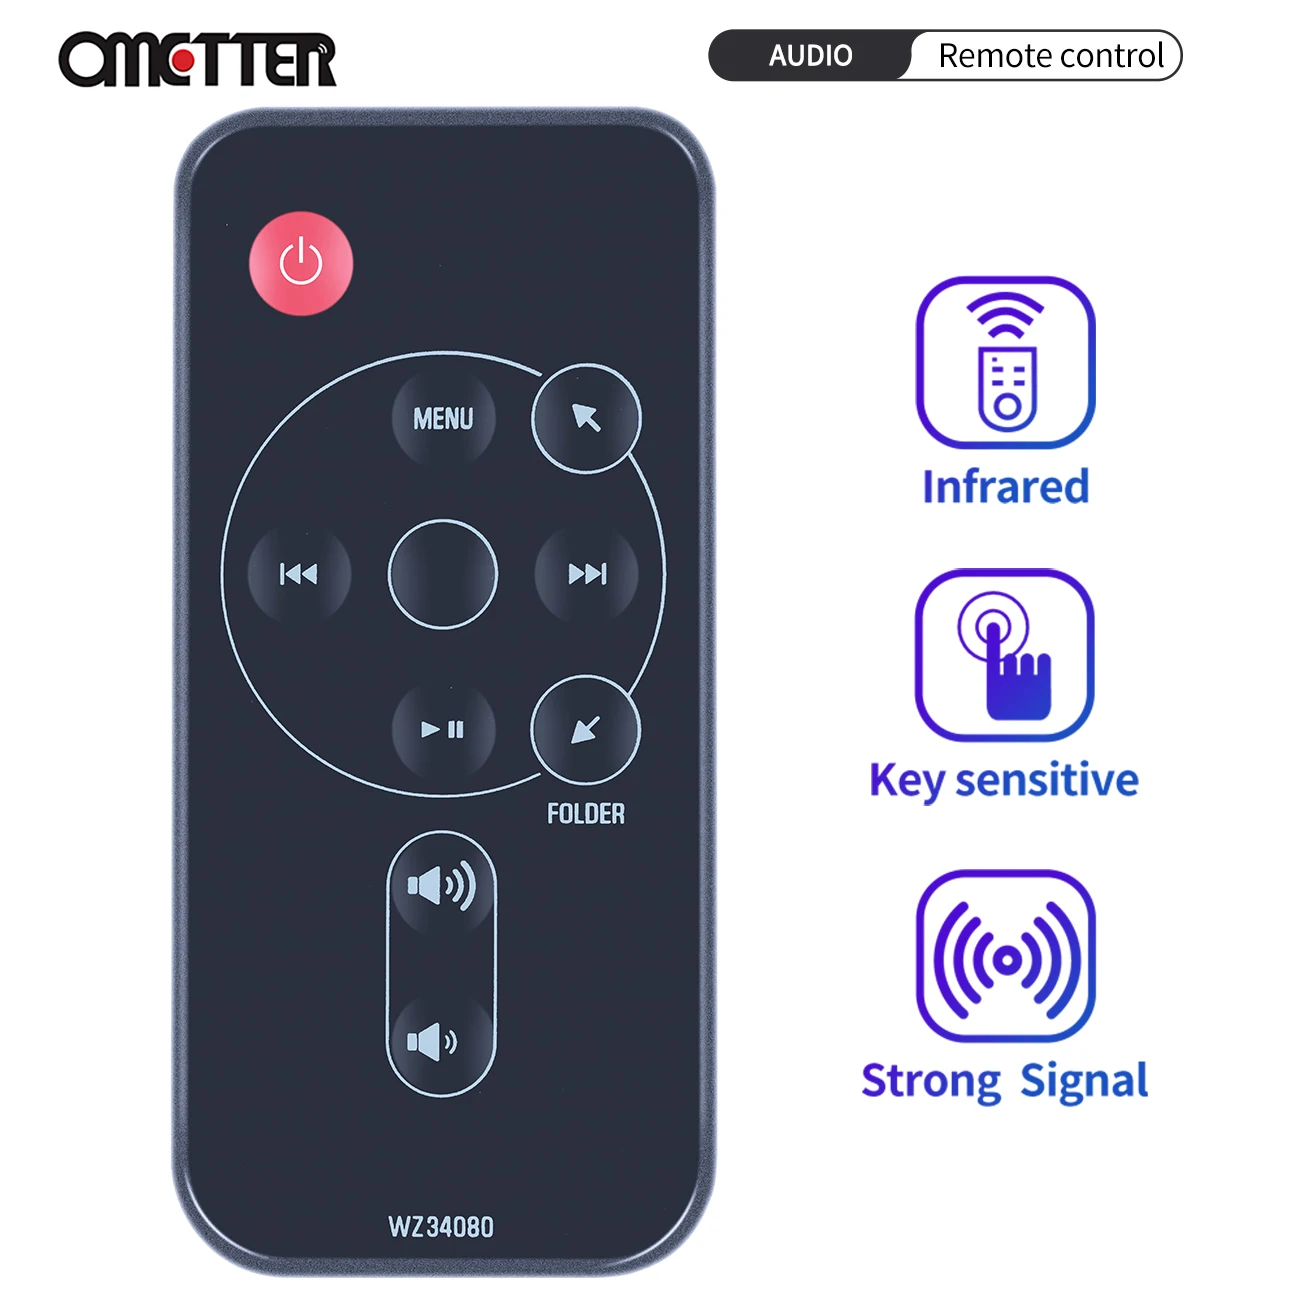 

New Original Remote Control WZ34080 for Yamaha WZ 34080 Replace PDX-11 PDX-13 PDX-30 PDX-31 Sound System